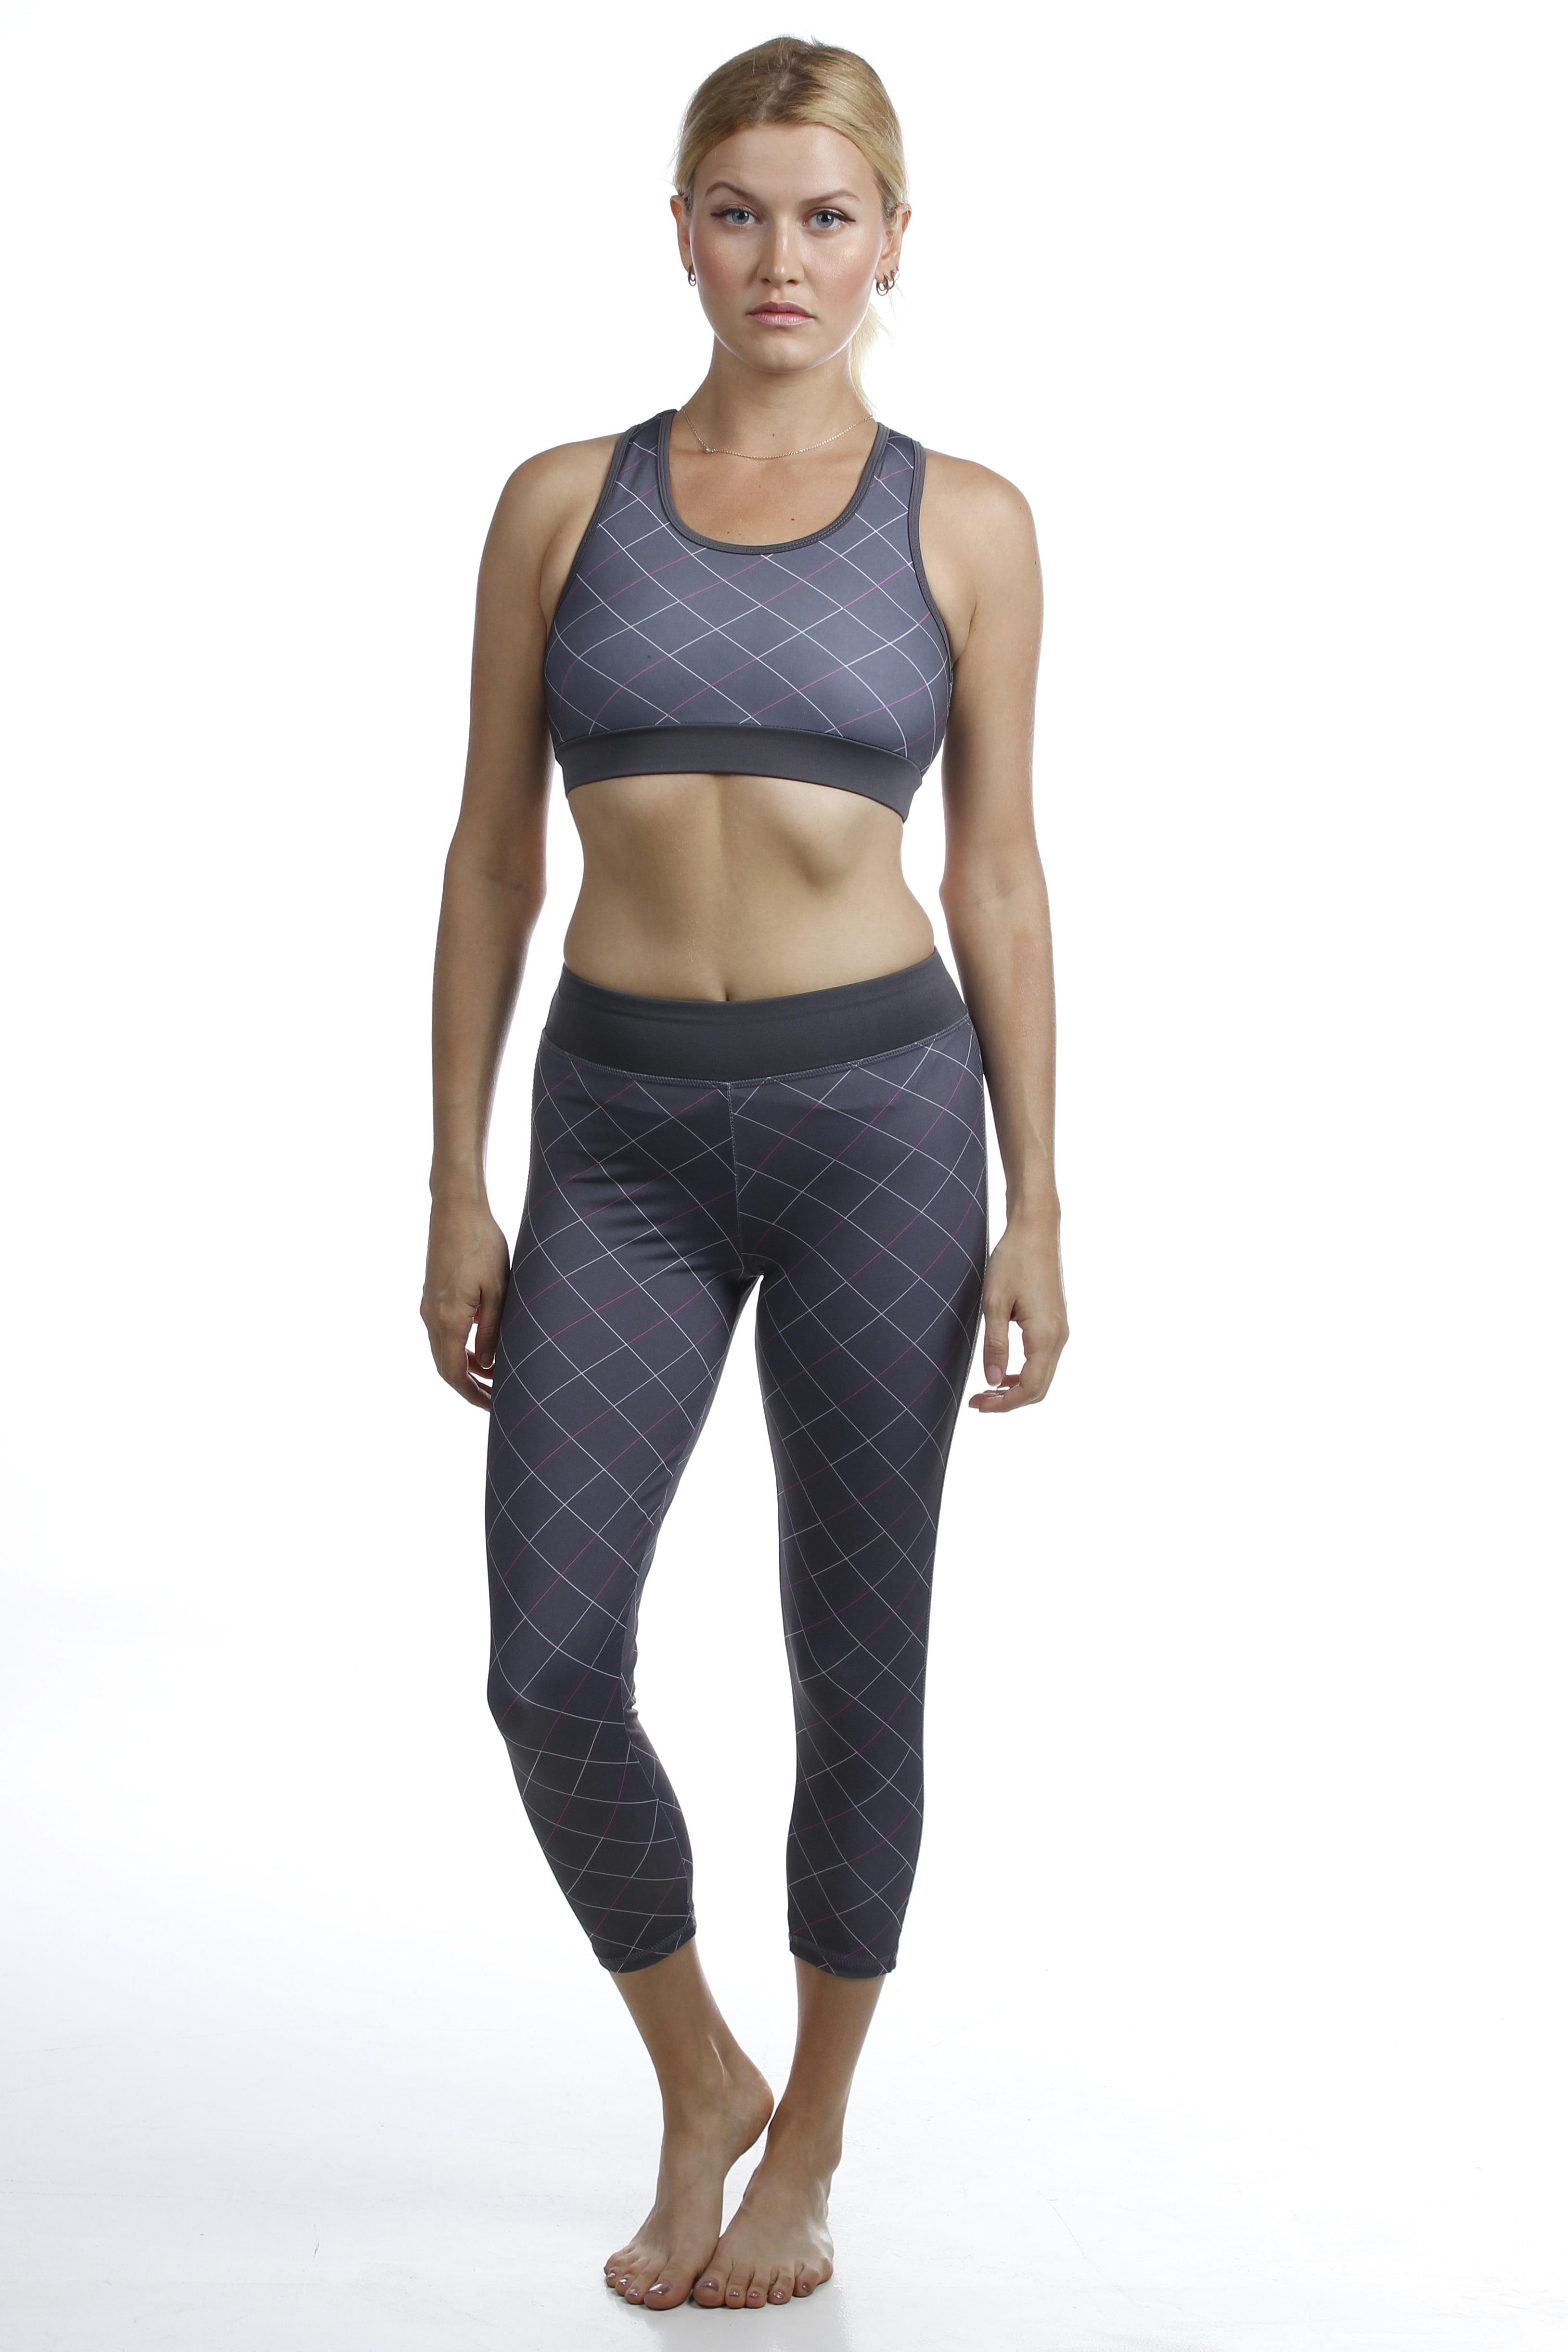 Fitness Apparel - Pictures